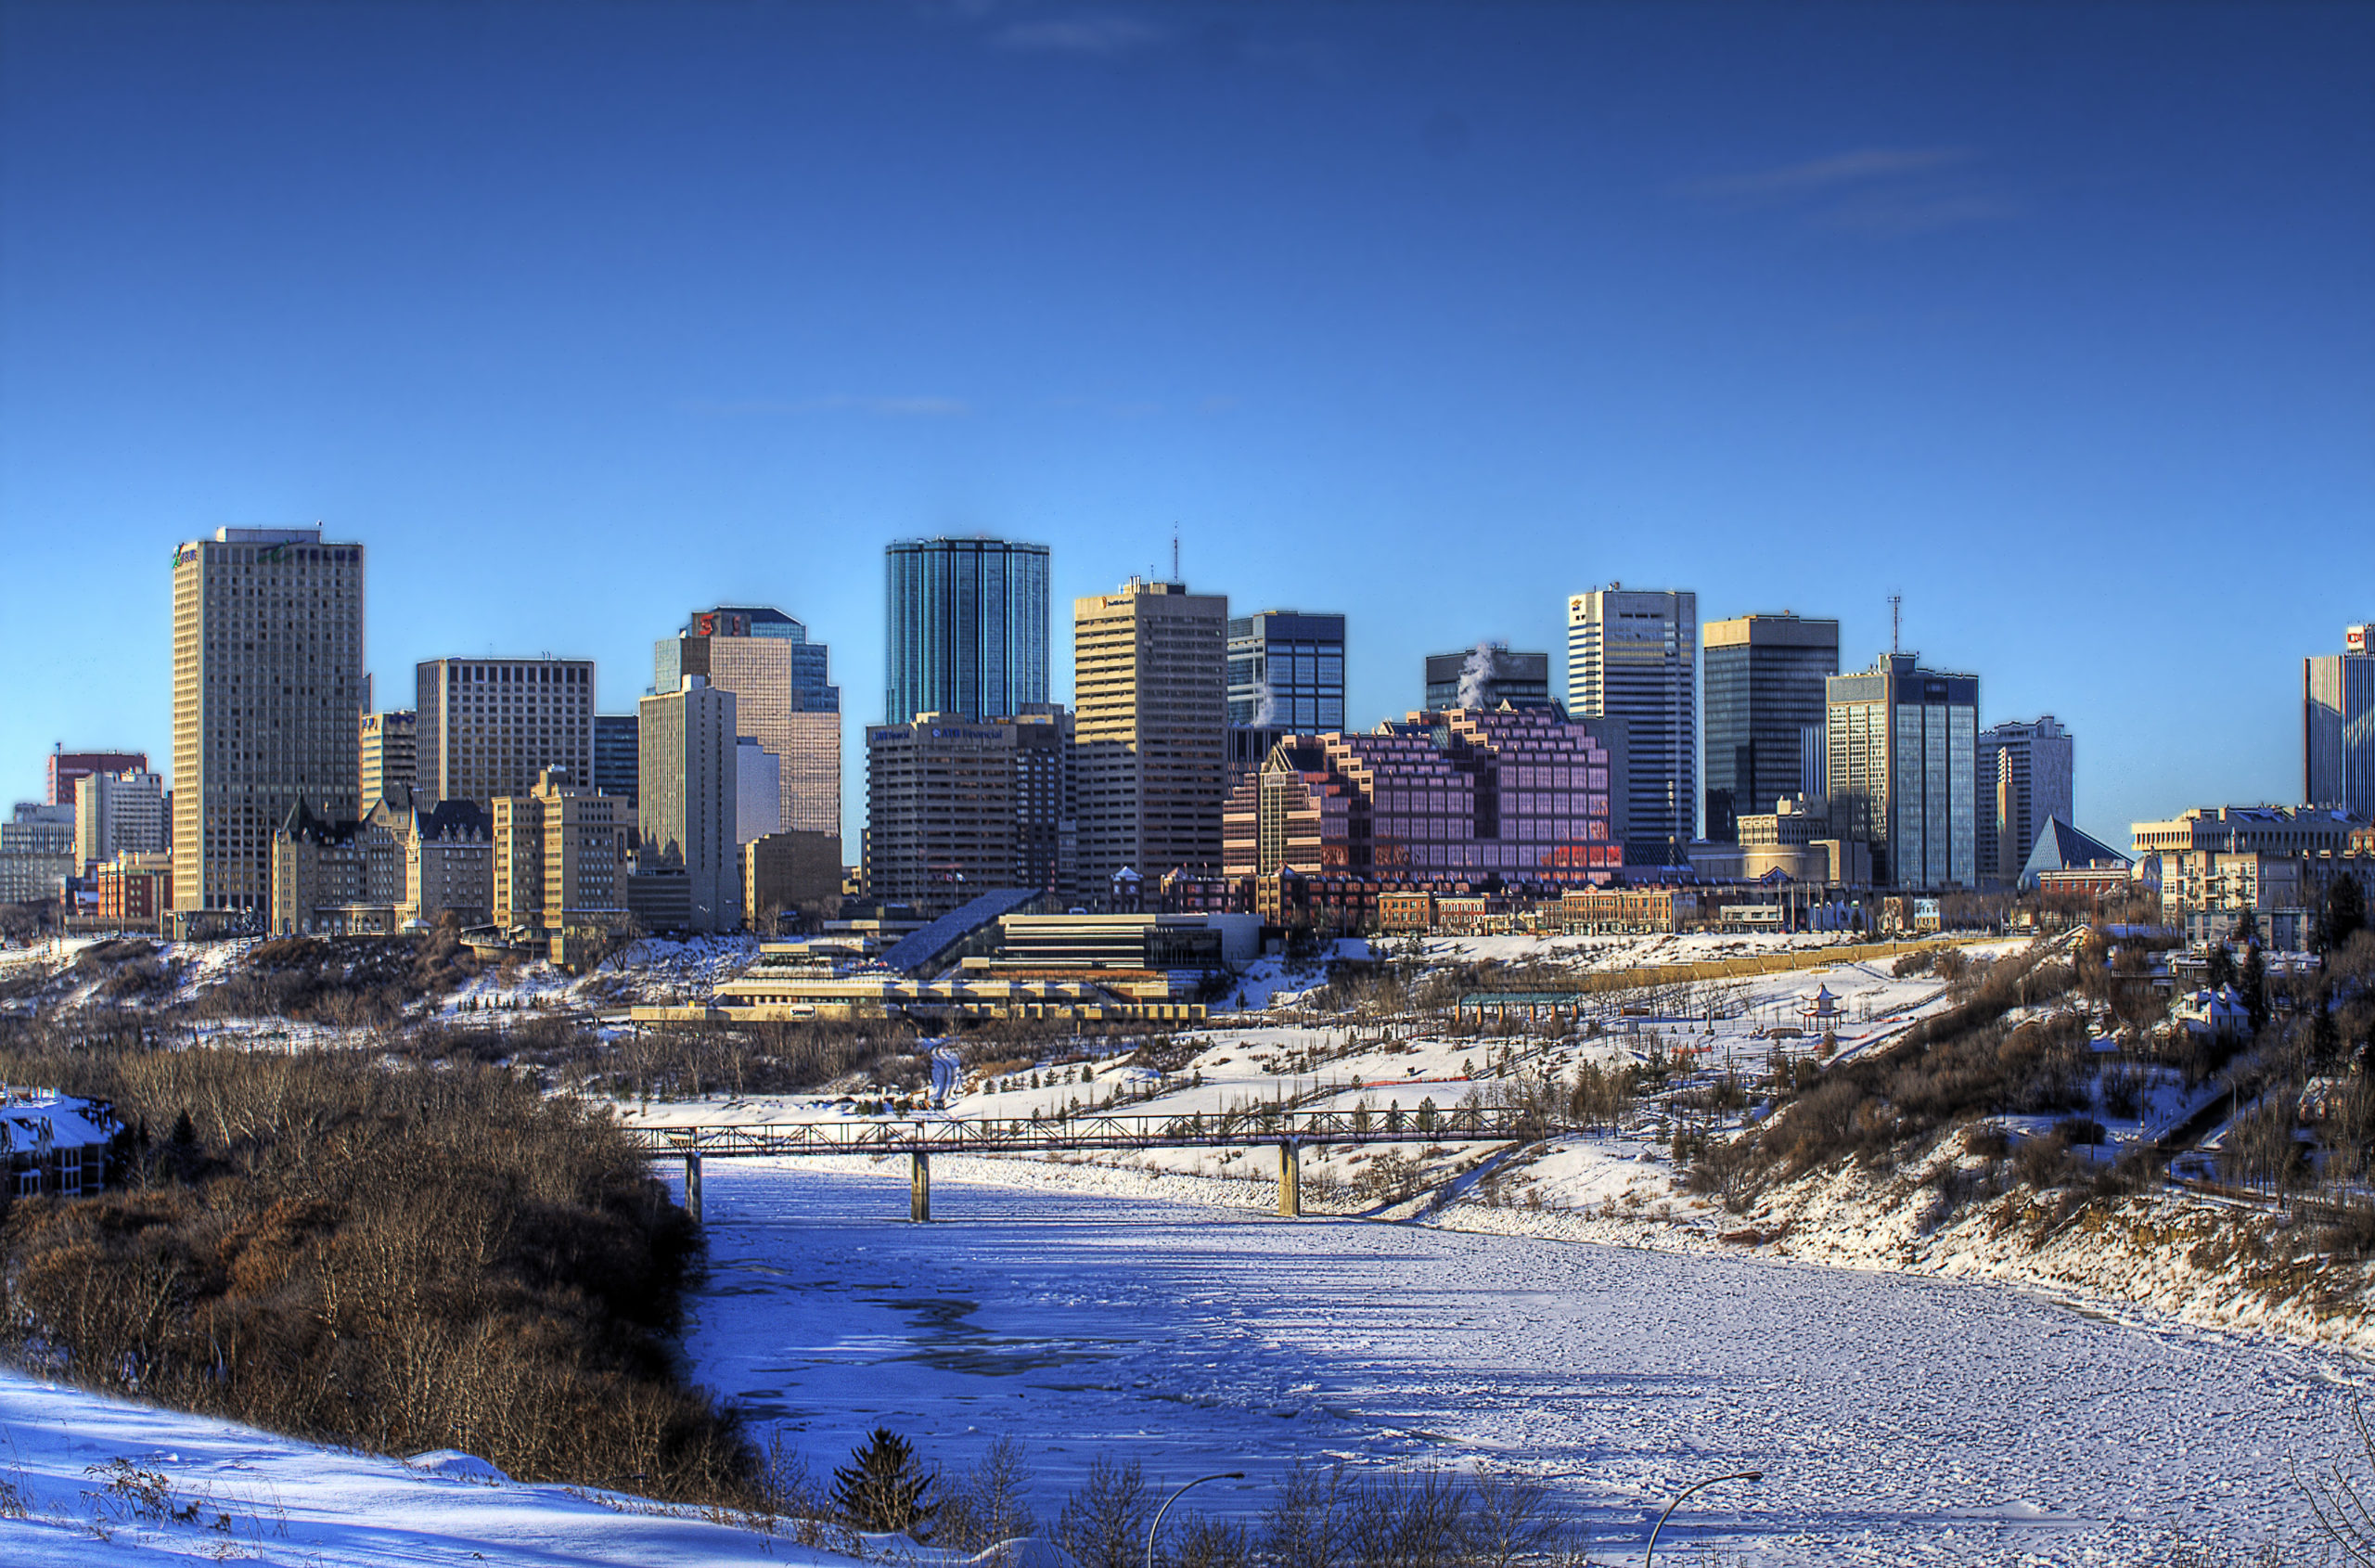 A photograph of the Edmonton skyline in winter with a blue sky and the frozen river in the foreground.